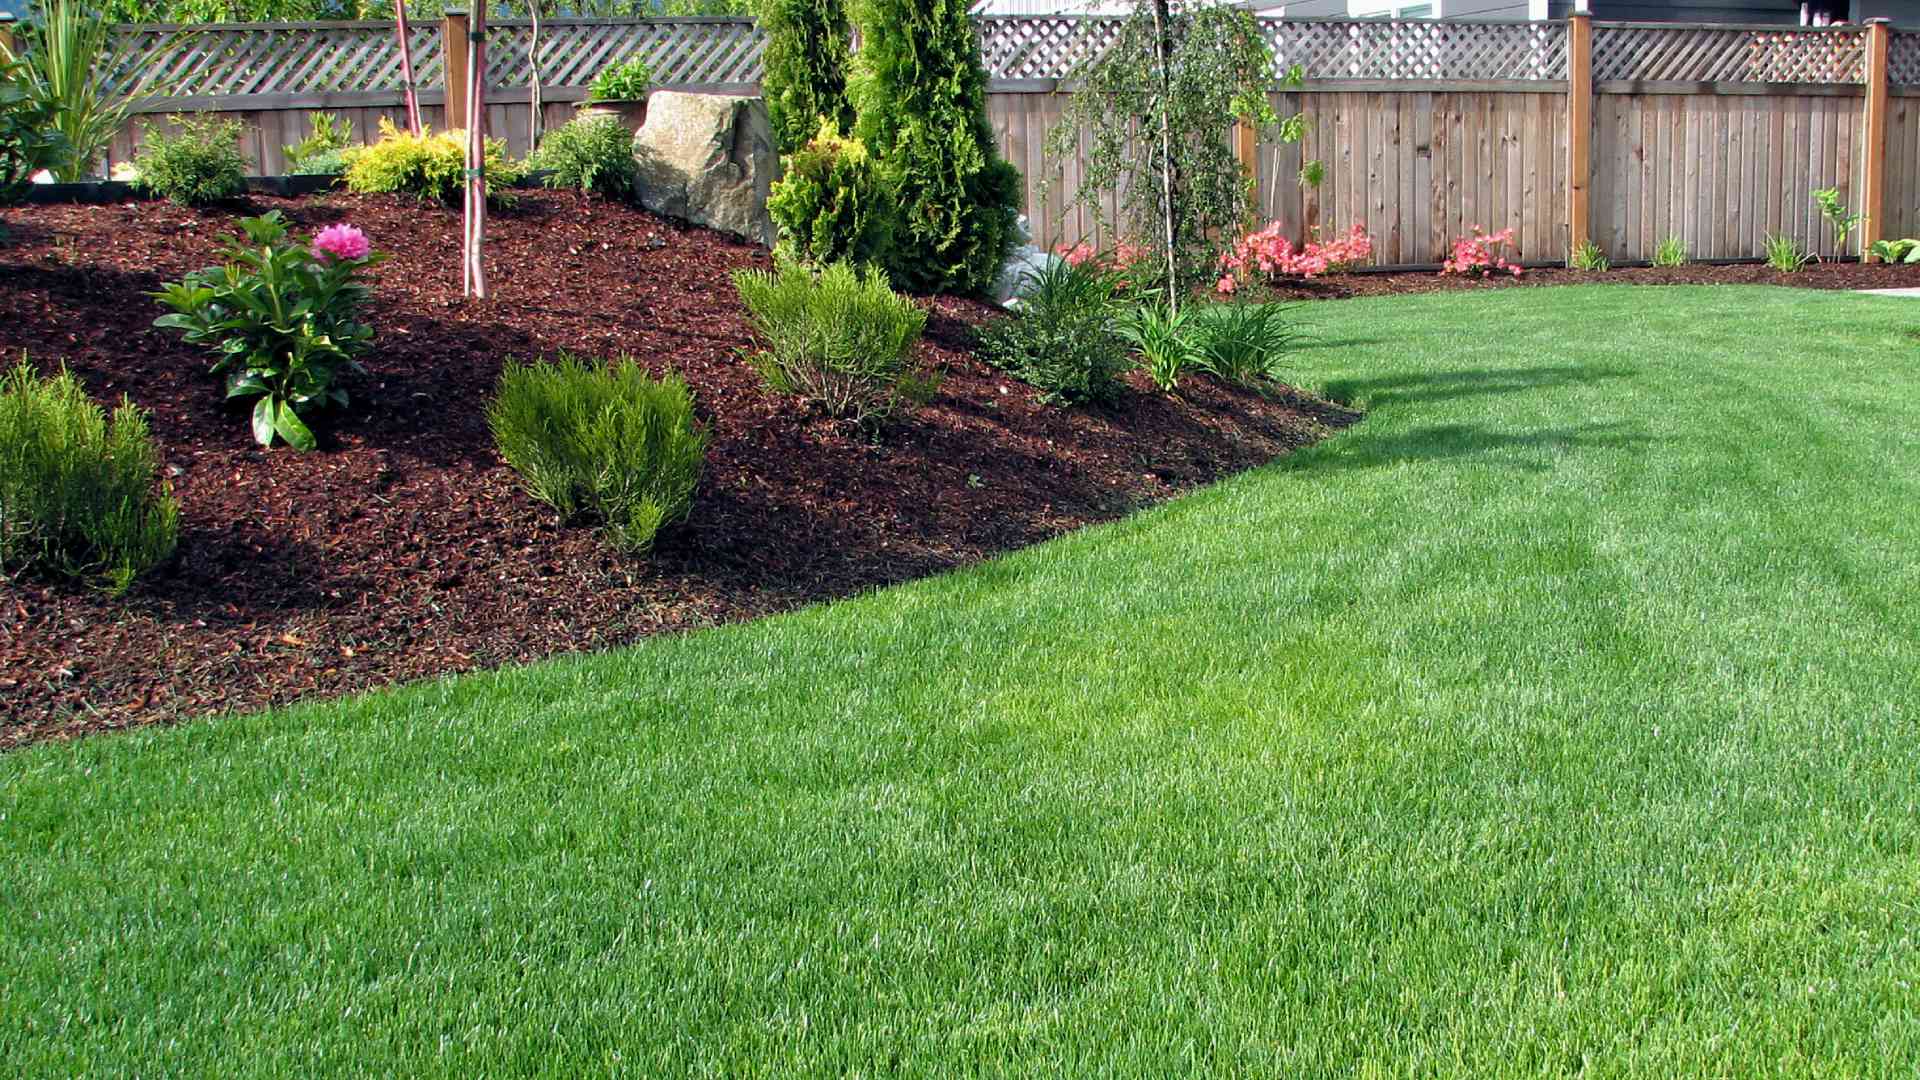 Spring Into the Growing Season With a Refreshing Spring Yard Cleanup!